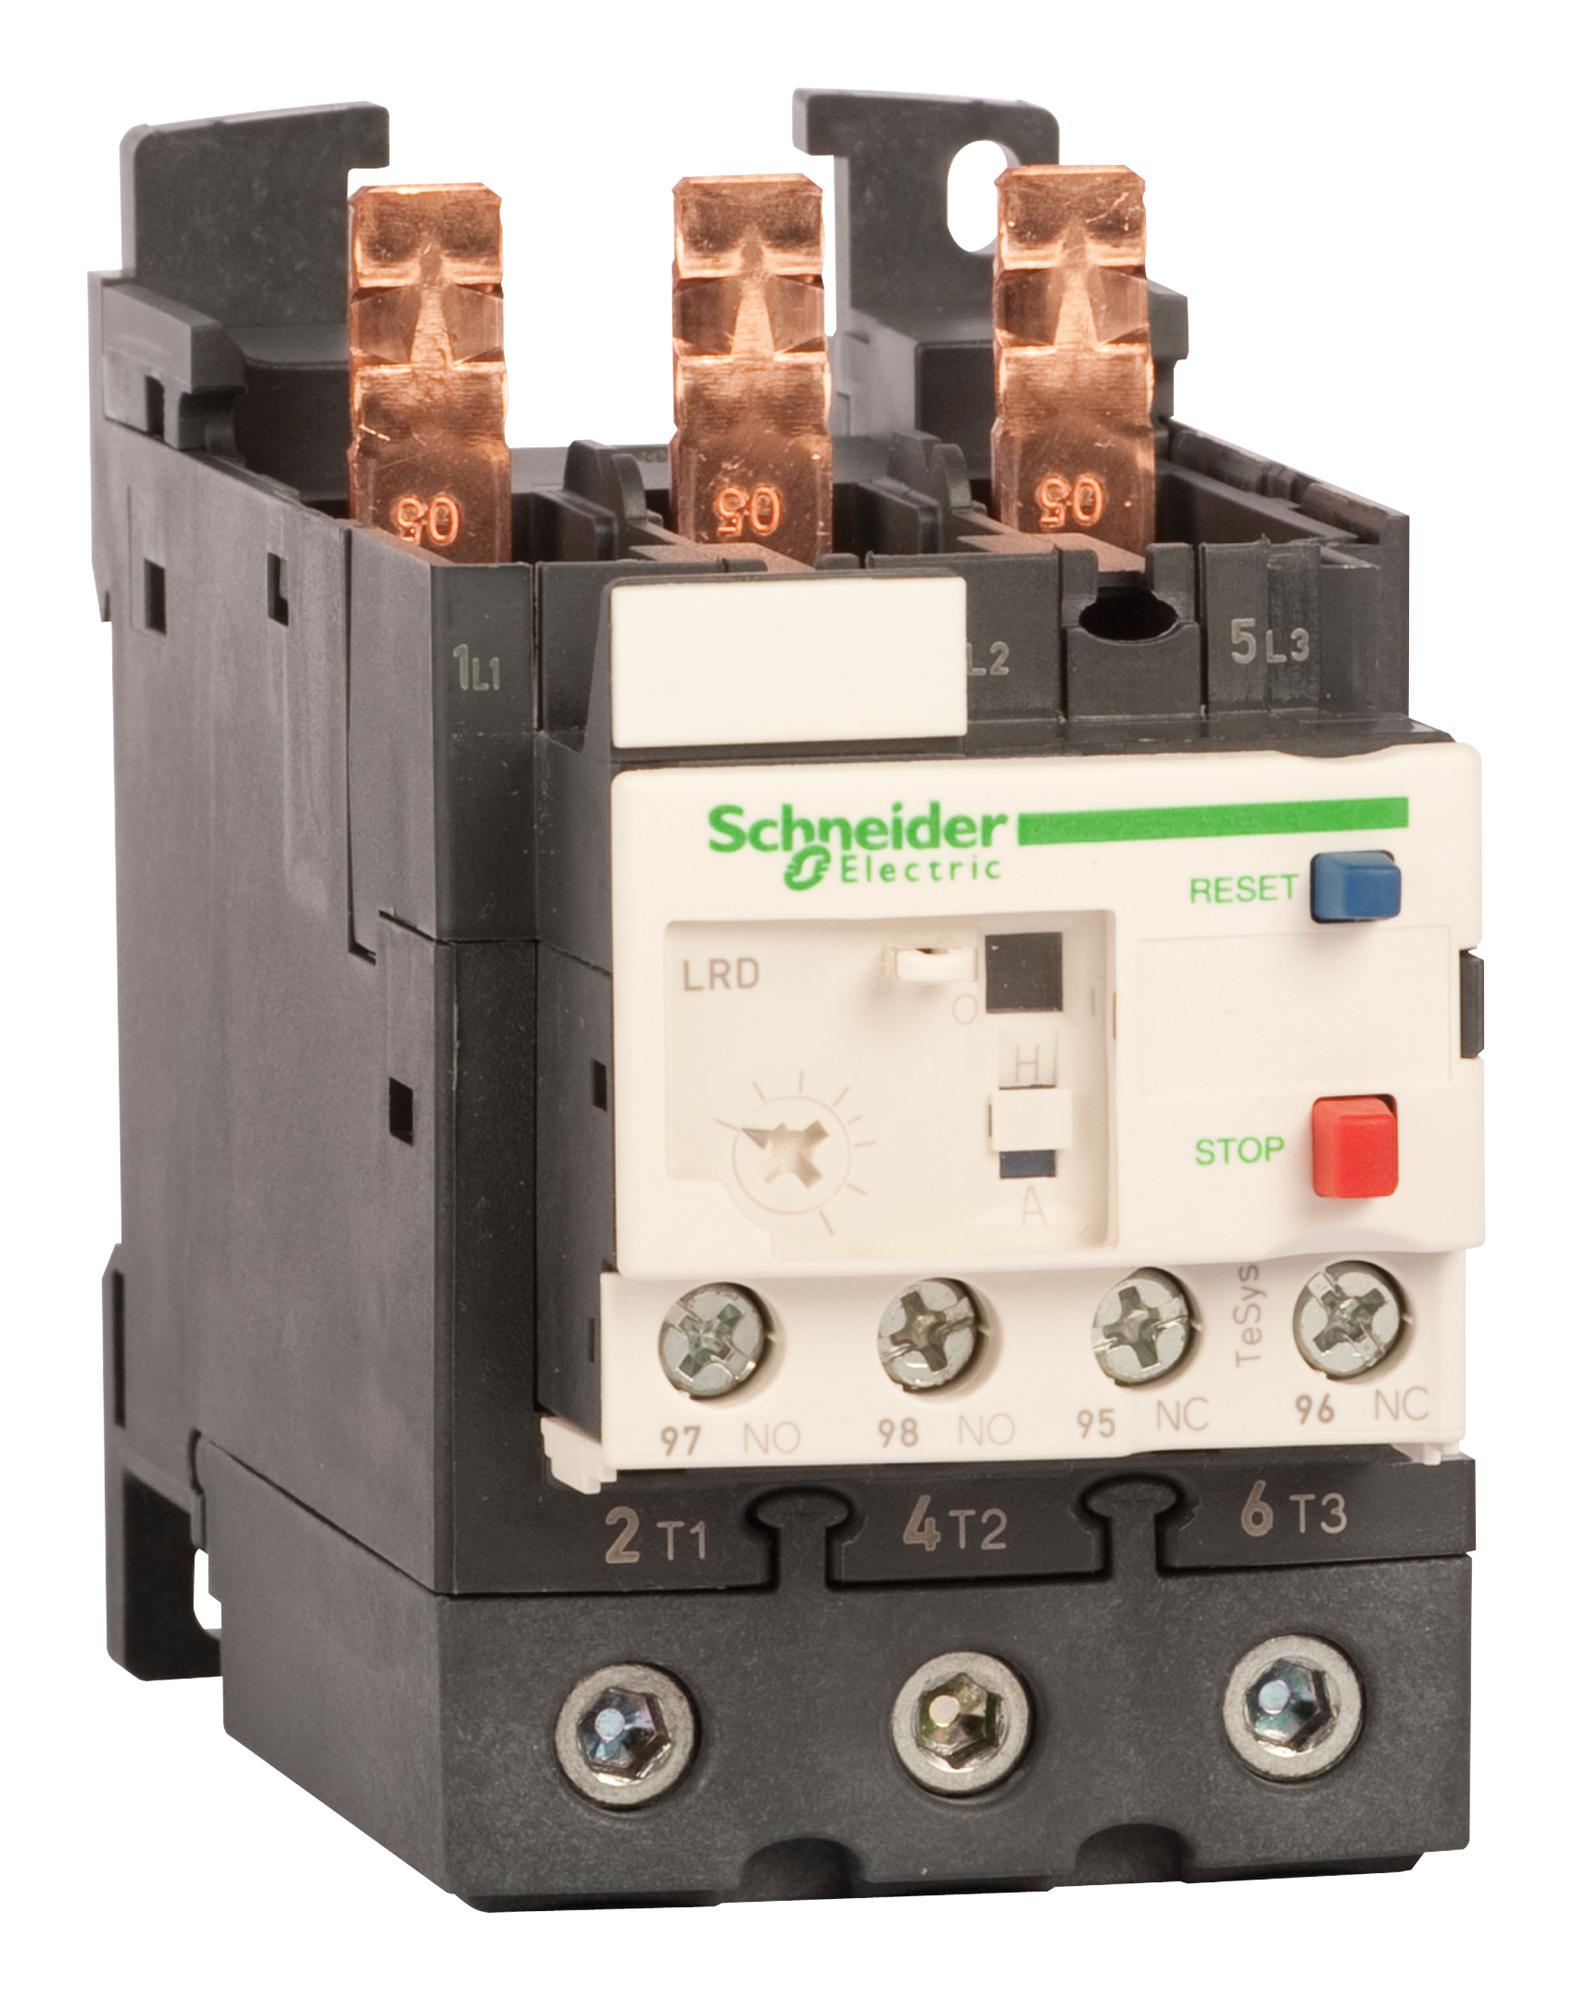 LRD340 THERMAL OVERLOAD RELAY, 30-40A SCHNEIDER ELECTRIC